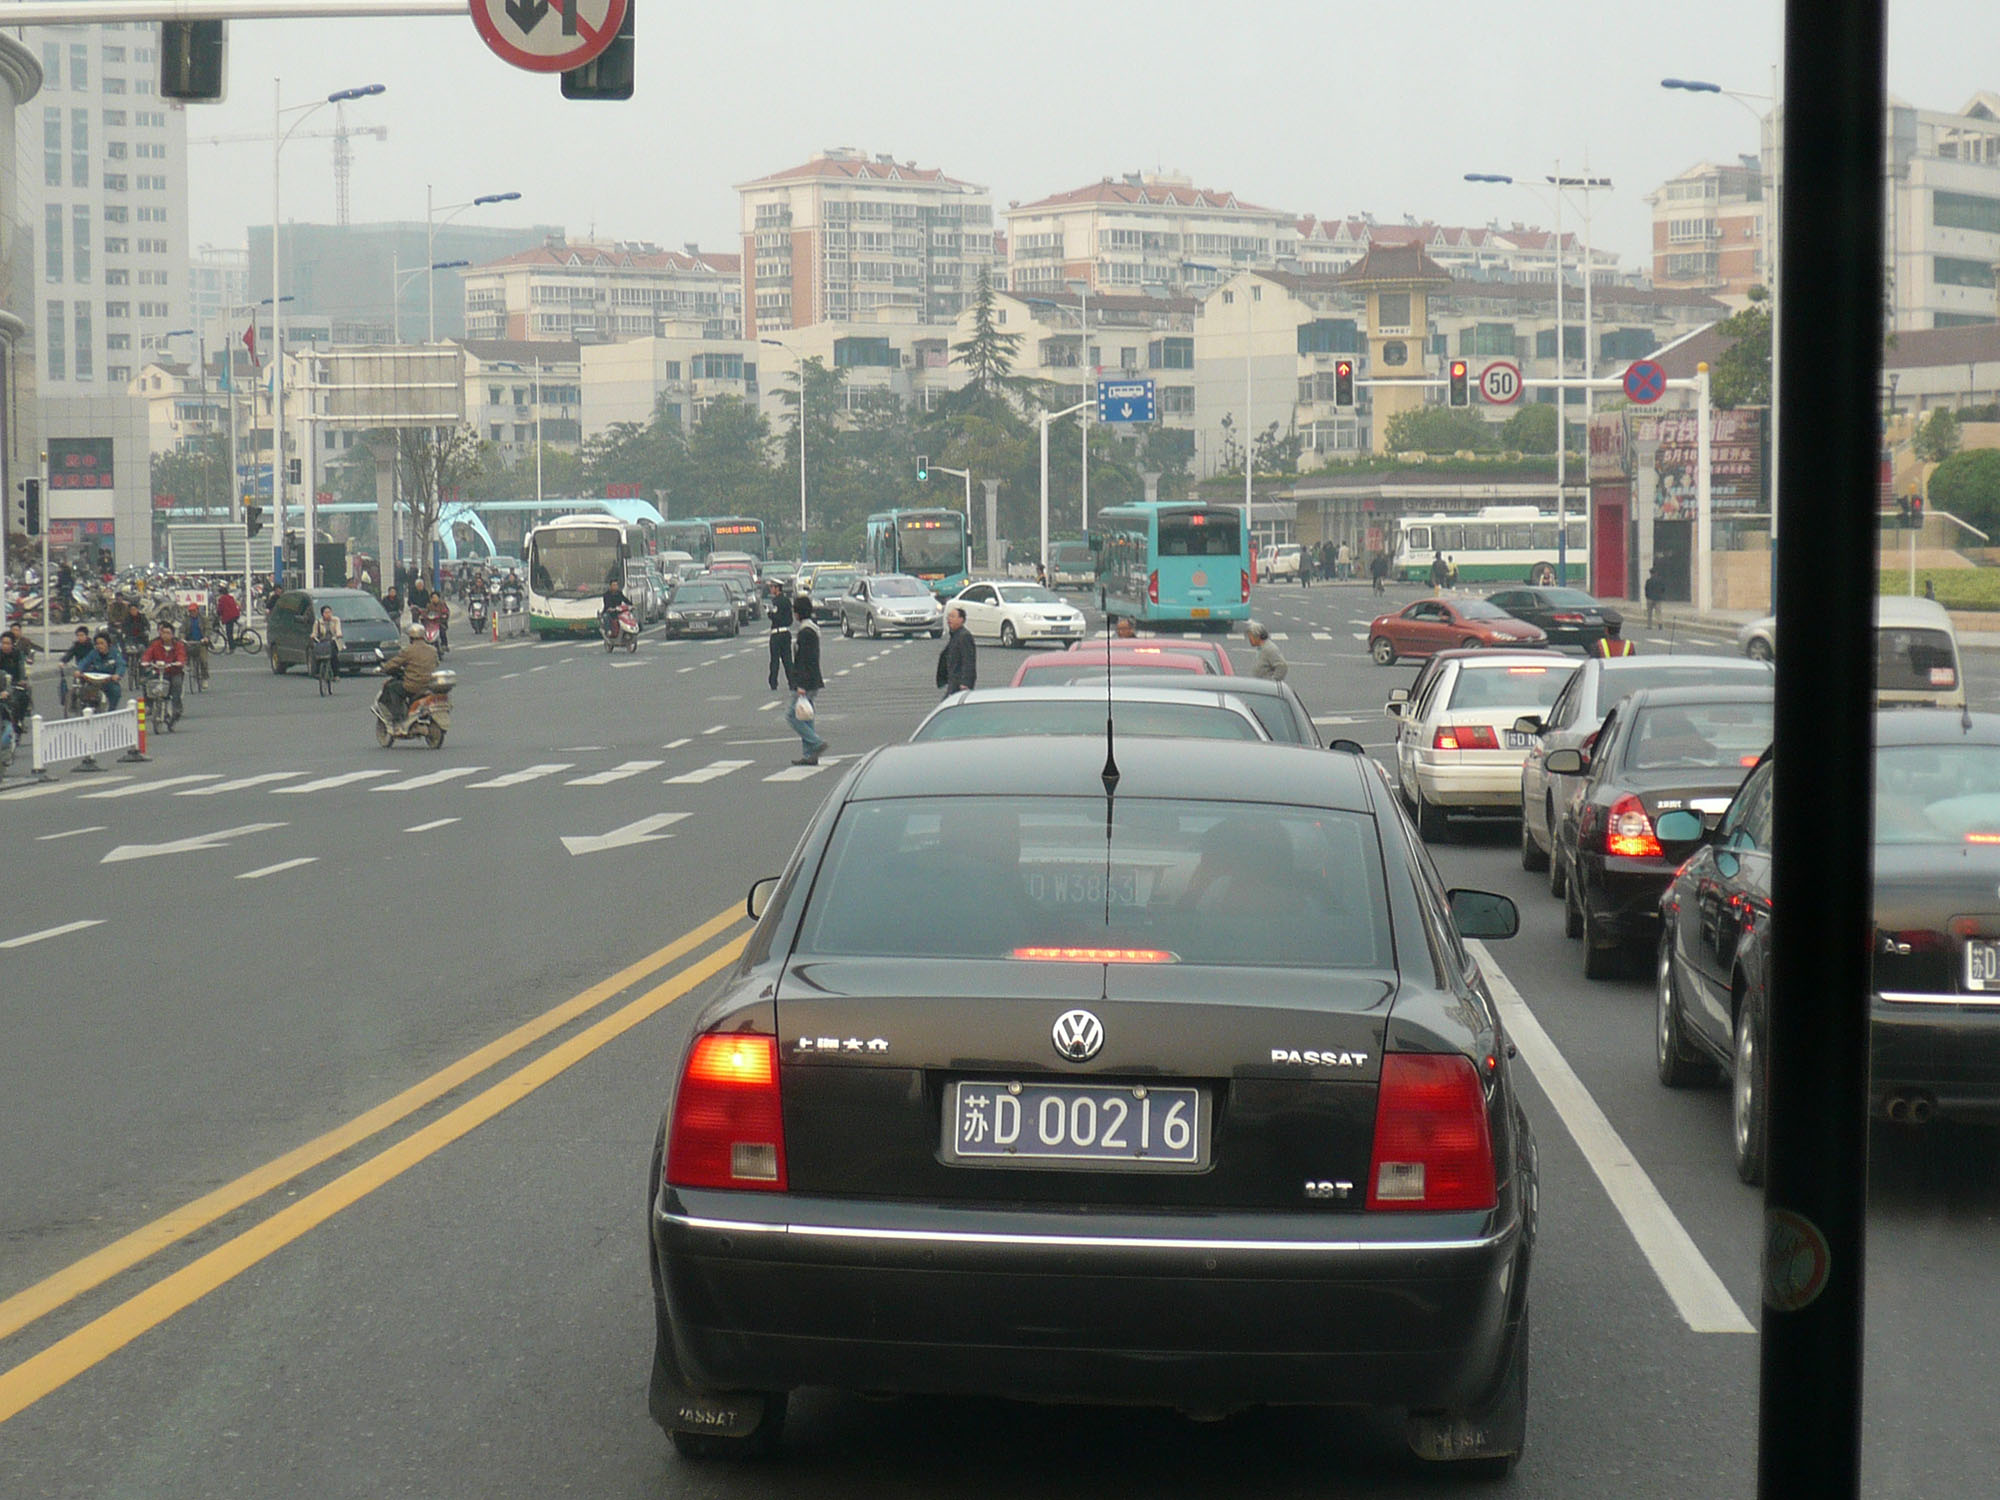 Fig. 22.46 Changzhou, China, operates its BRT system along mixed-traffic lanes at a crucial segment of the corridor, and thus travel times and system control are negatively affected.